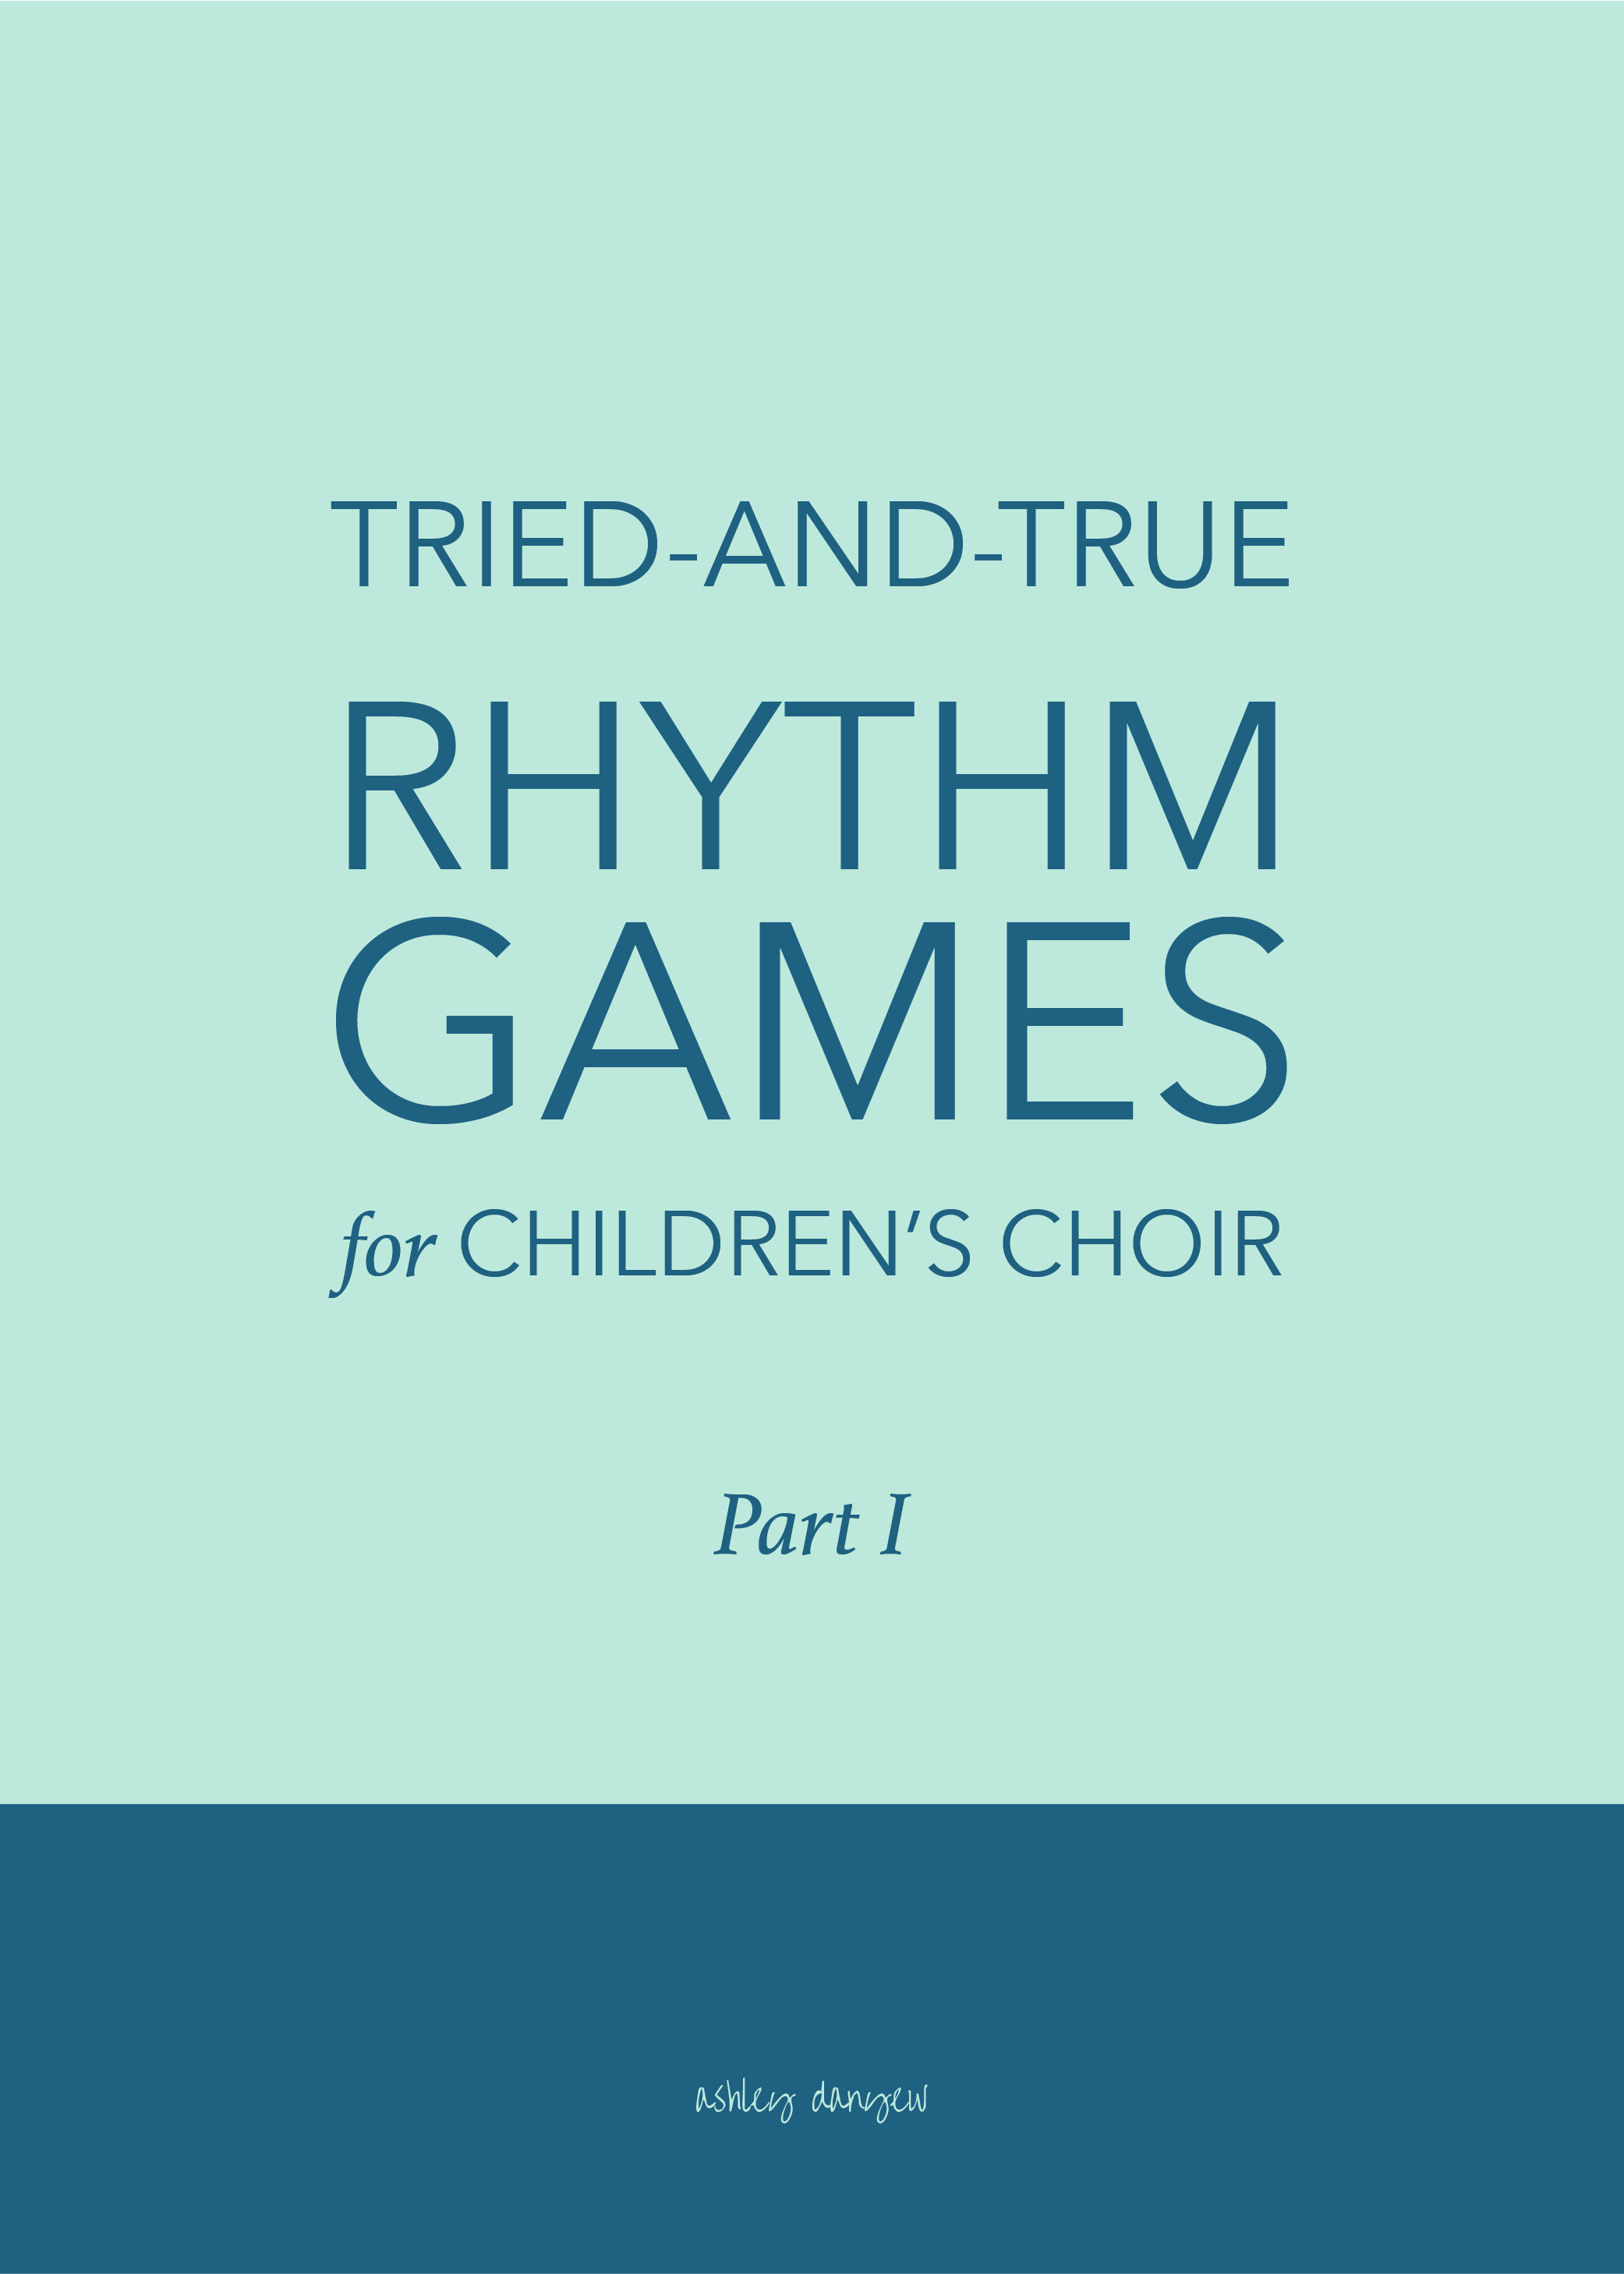 Copy of Tried-and-True Rhythm Games for Children's Choir: Part I